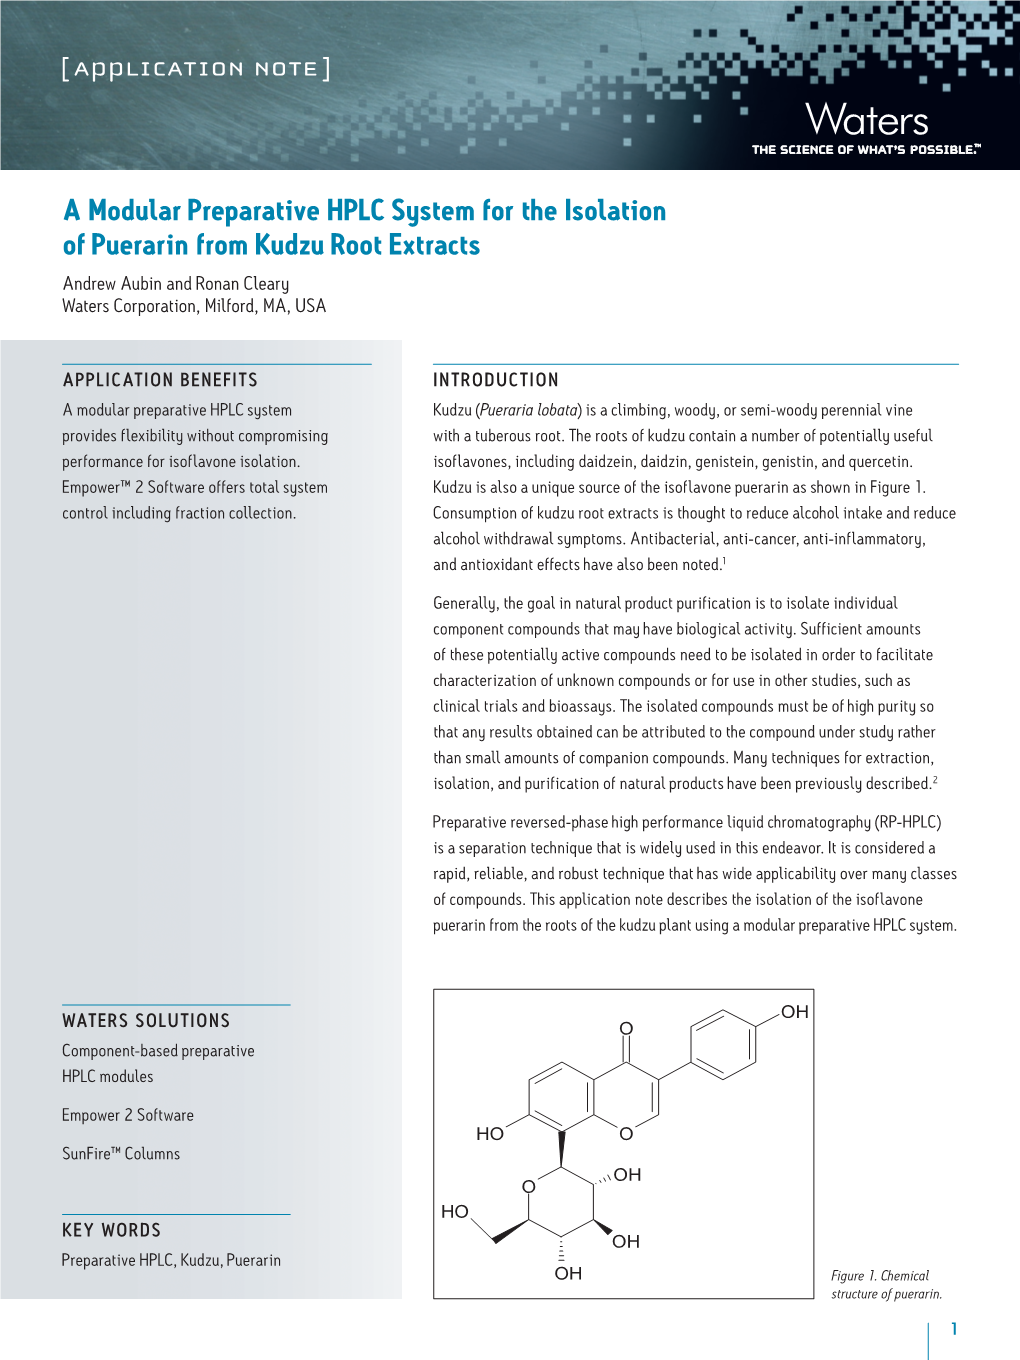 A Modular Preparative HPLC System for the Isolation of Puerarin from Kudzu Root Extracts Andrew Aubin and Ronan Cleary Waters Corporation, Milford, MA, USA